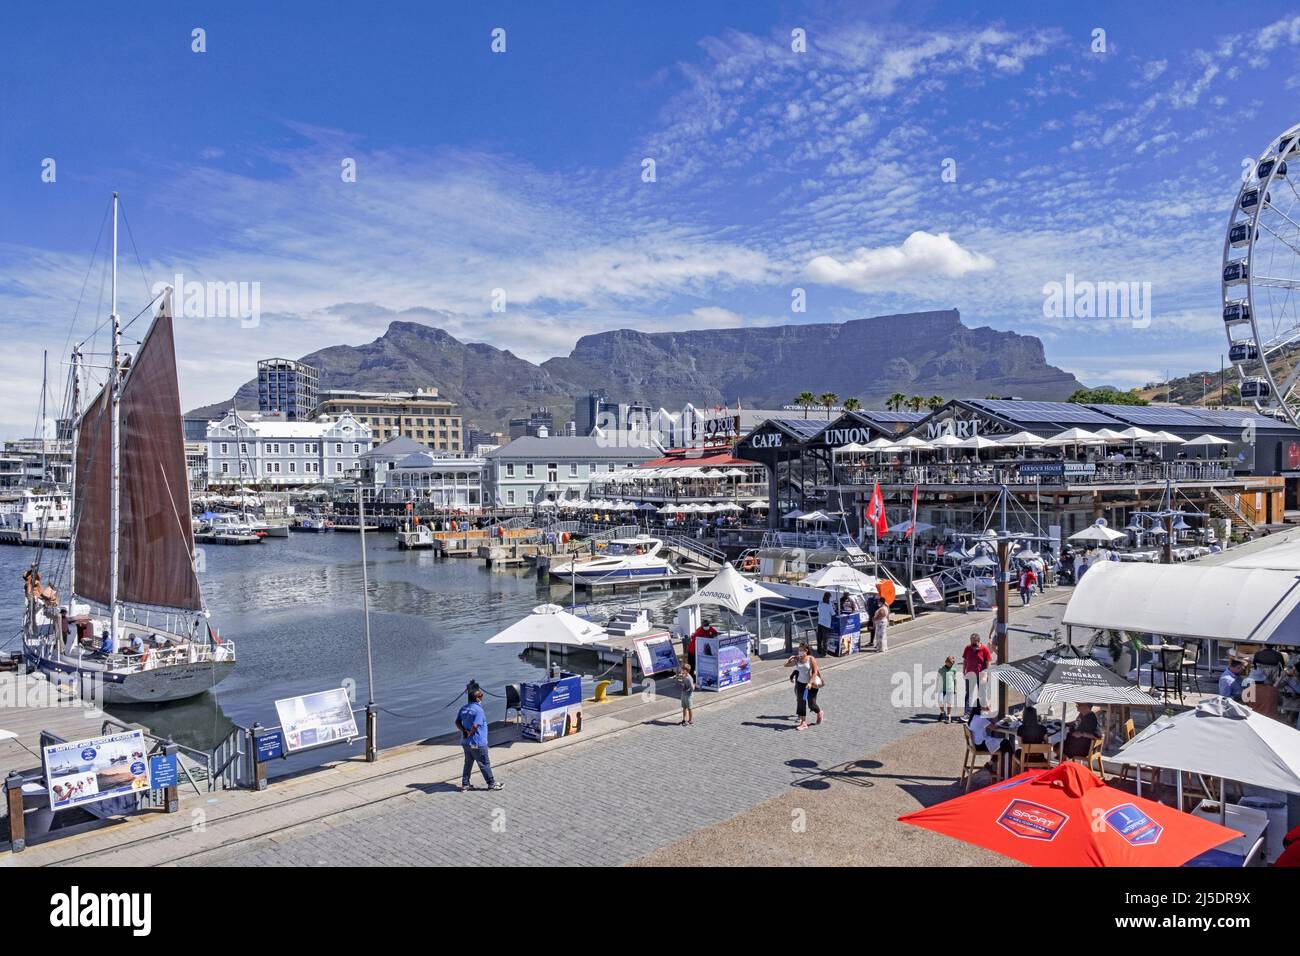 Victoria & Alfred (V&A) Waterfront harbour along Table Bay and the Table Mountain at Cape Town / Kaapstad, Western Cape Province, South Africa Stock Photo